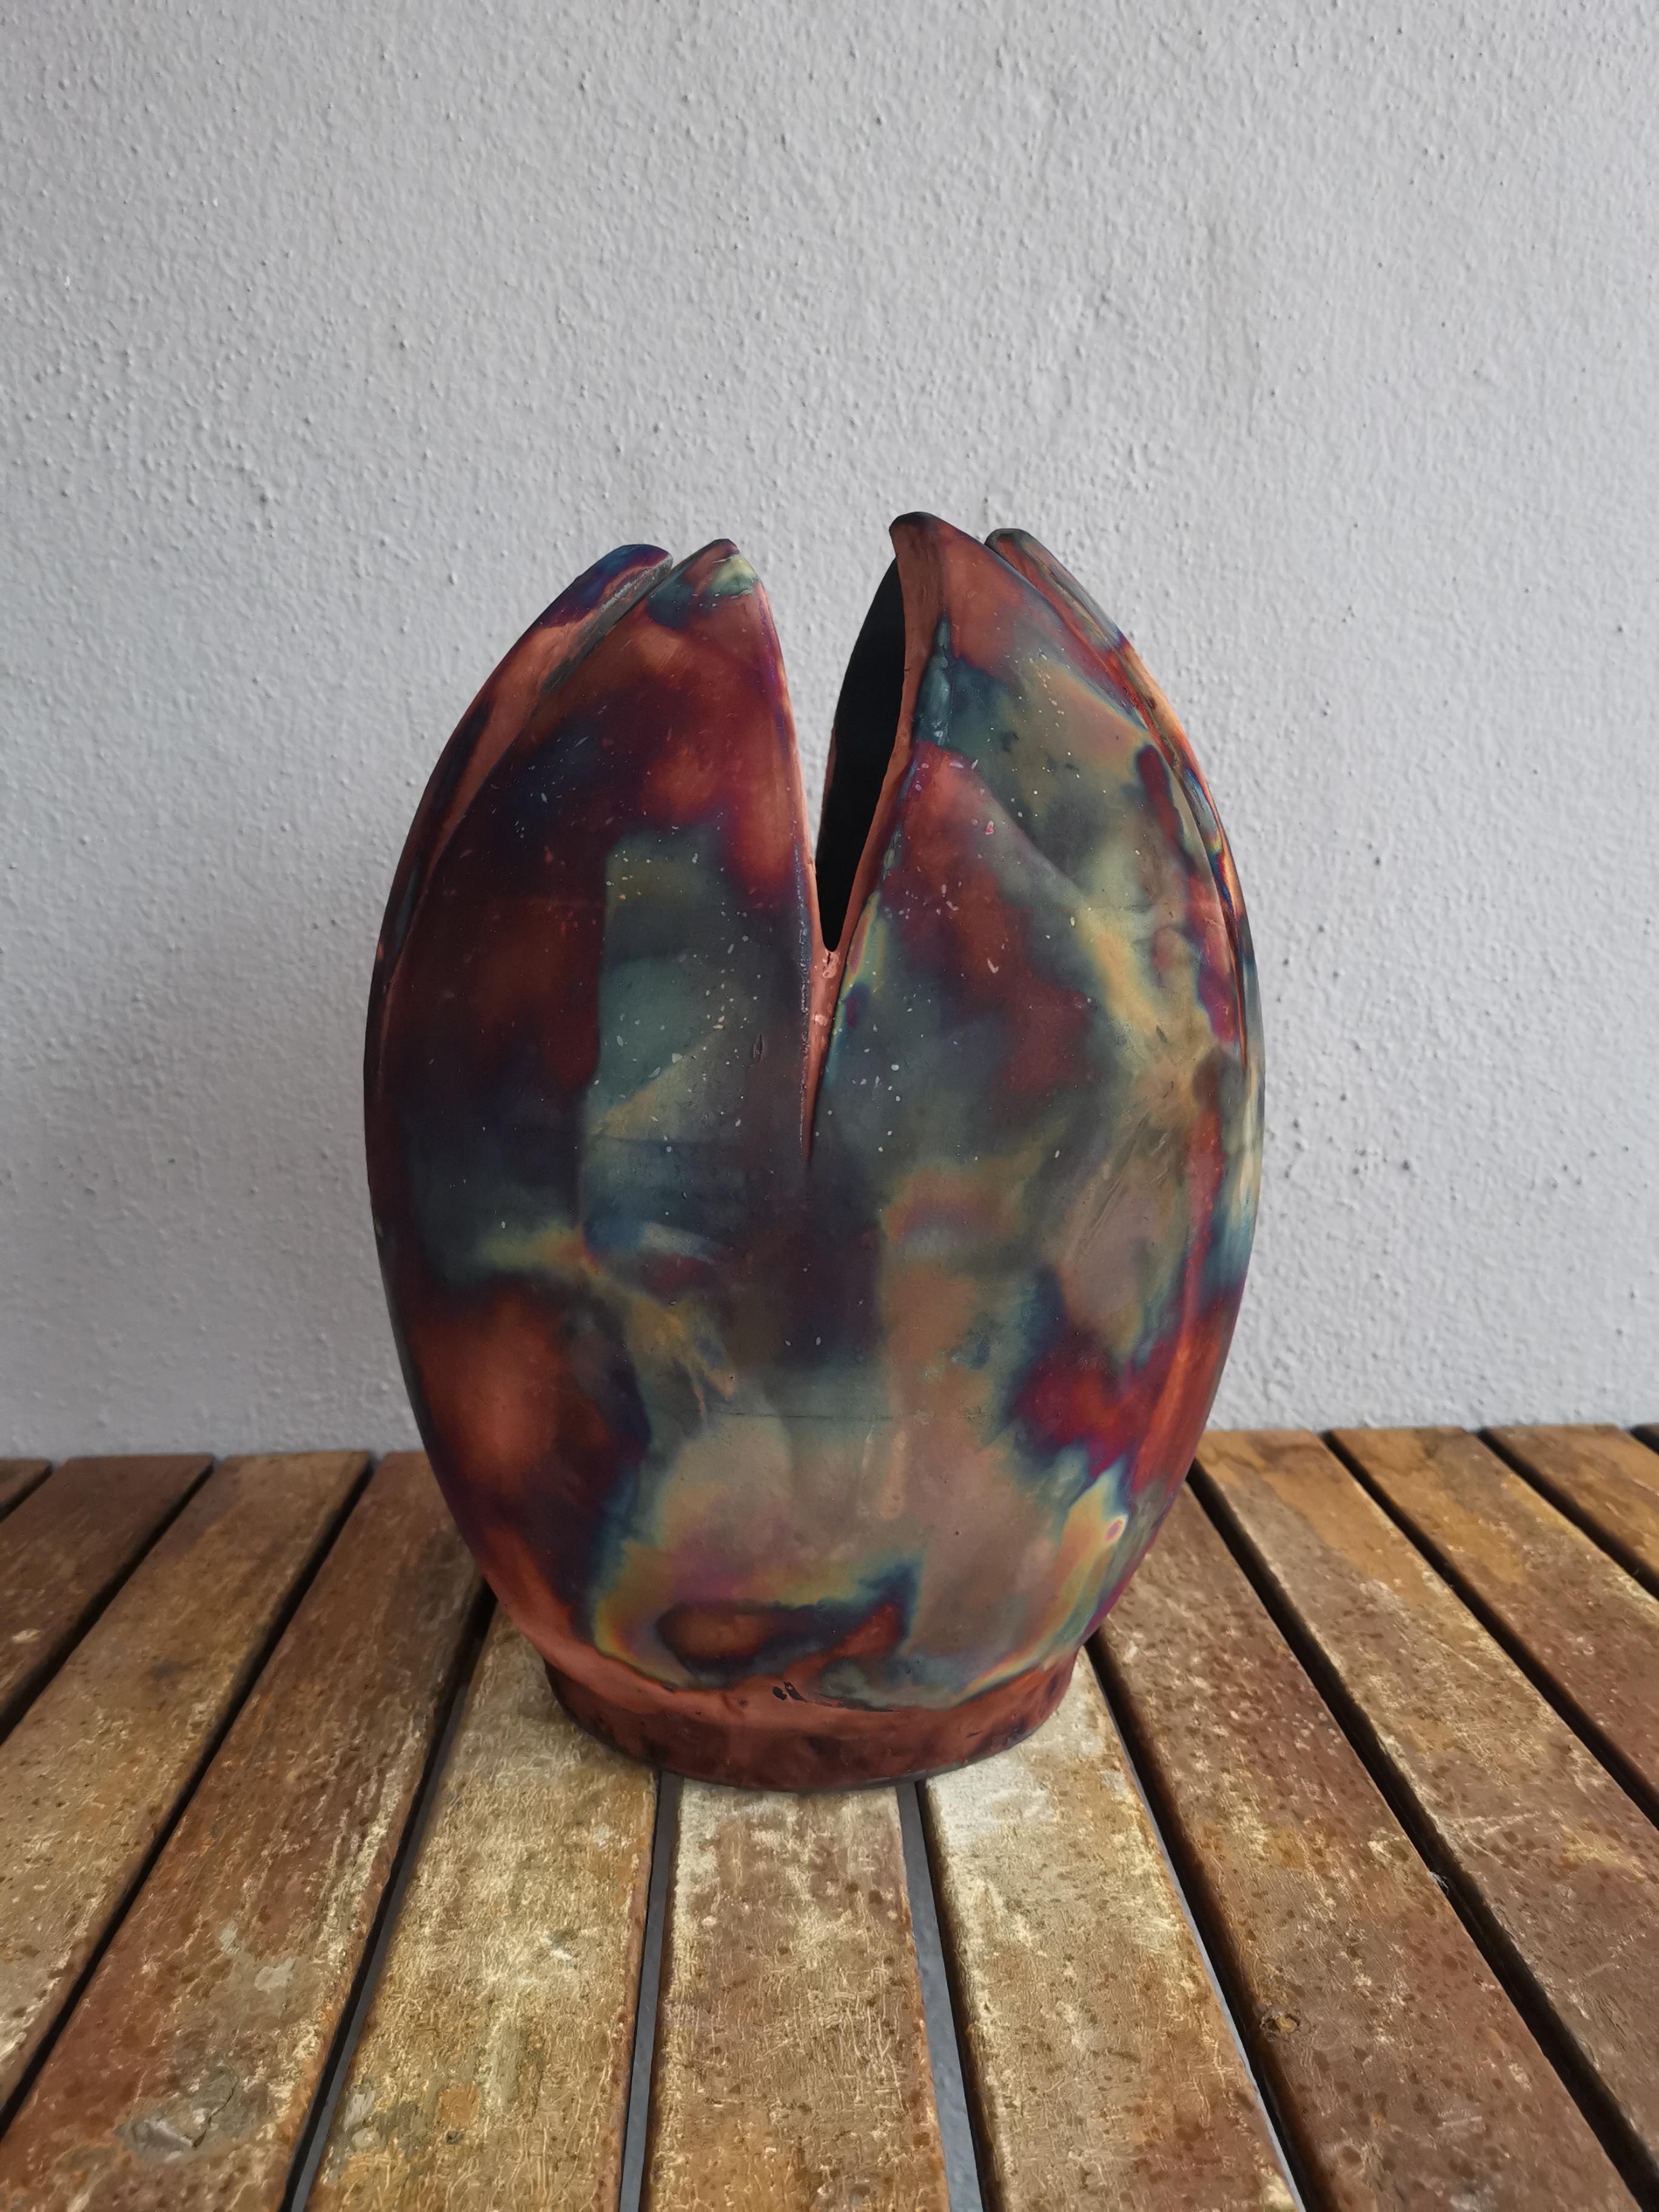 With a shape inspired from the tulip flower, the RAAQUU Flower Vase expresses a wonderful rainbow sheen on a 6 half petal top oval shaped vase. This vase requires precise forming and is my most complicated shape so far. 
 
The final vase will be